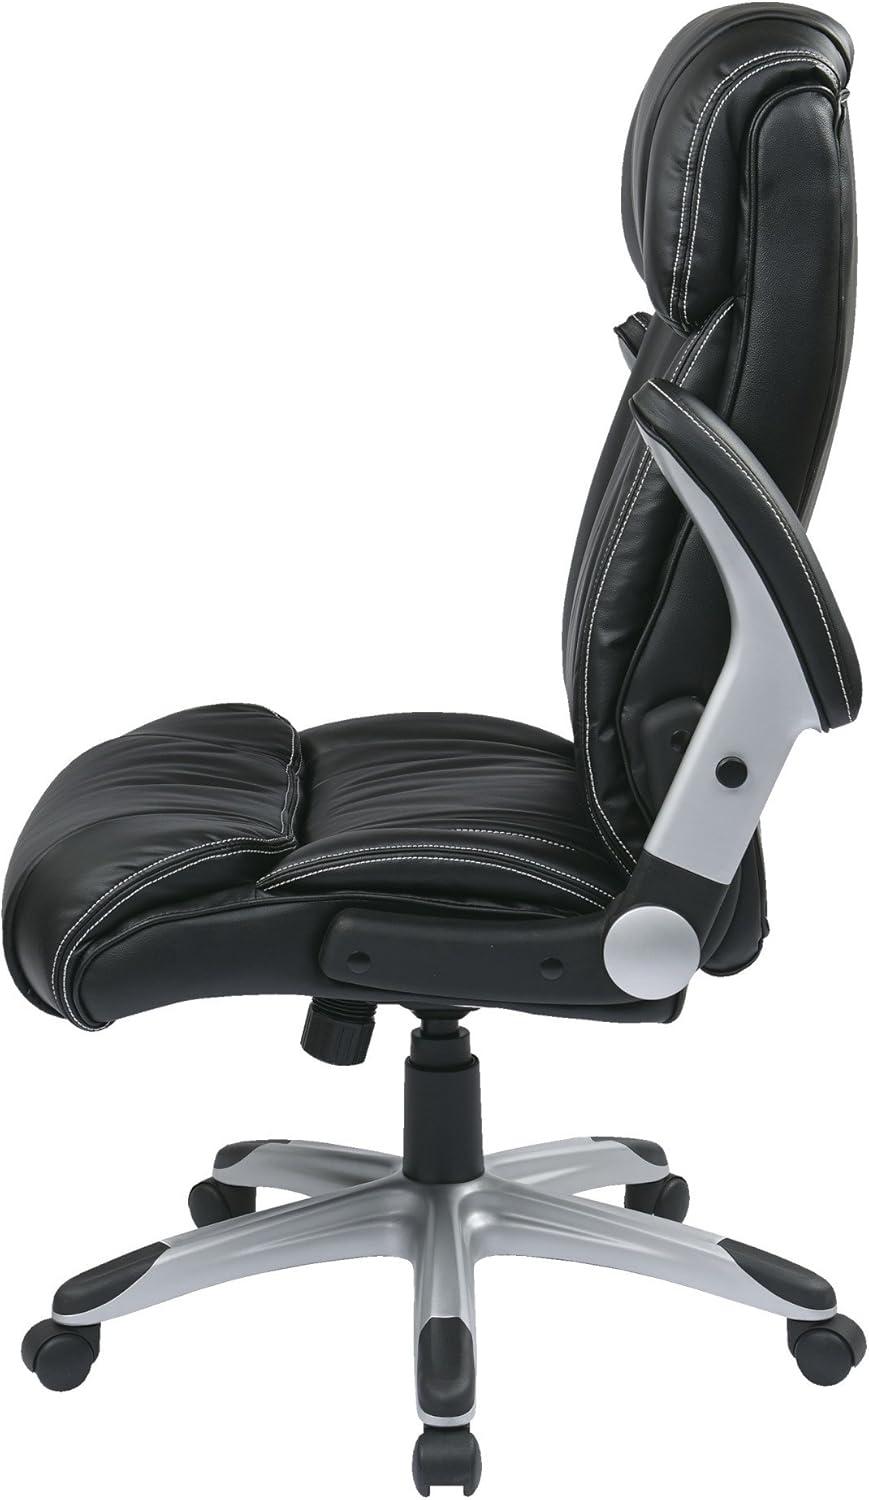 ErgoExec High-Back Swivel Black Leather Executive Chair with Adjustable Arms